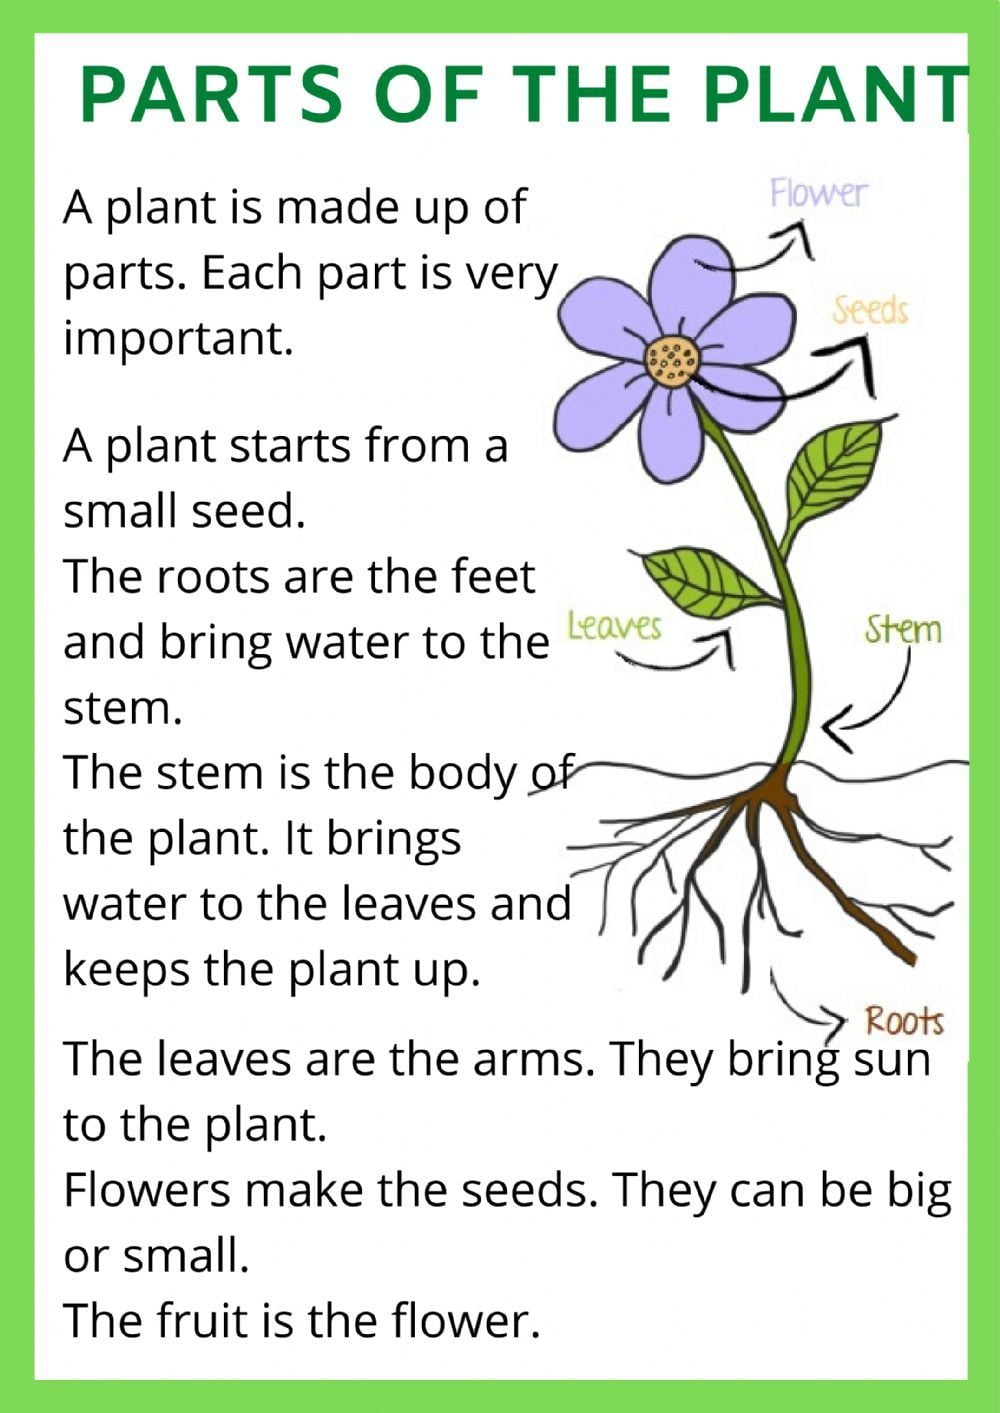 Parts Of A Plant Interactive And Downloadable Worksheet You Can Do The Exercises Onl Reading Comprehension For Kids English Lessons For Kids Plants Worksheets